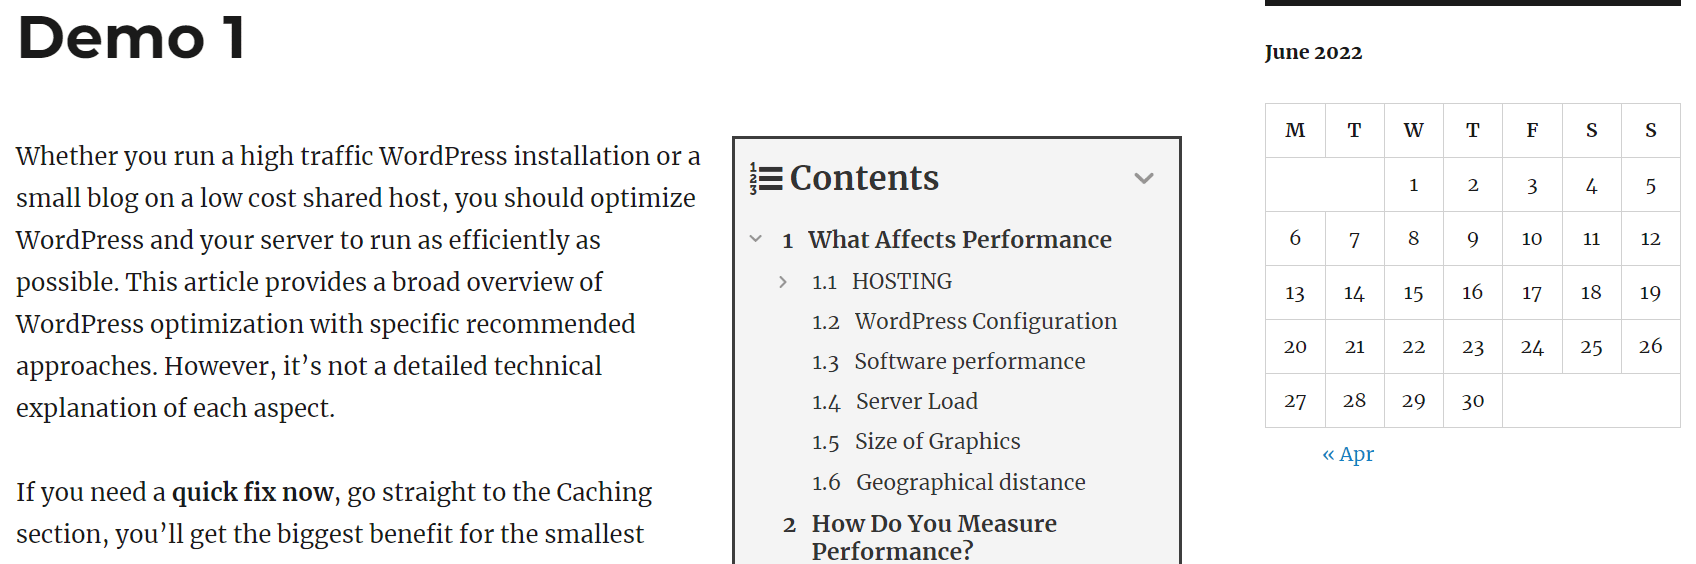 FixedTOC table of contents. 